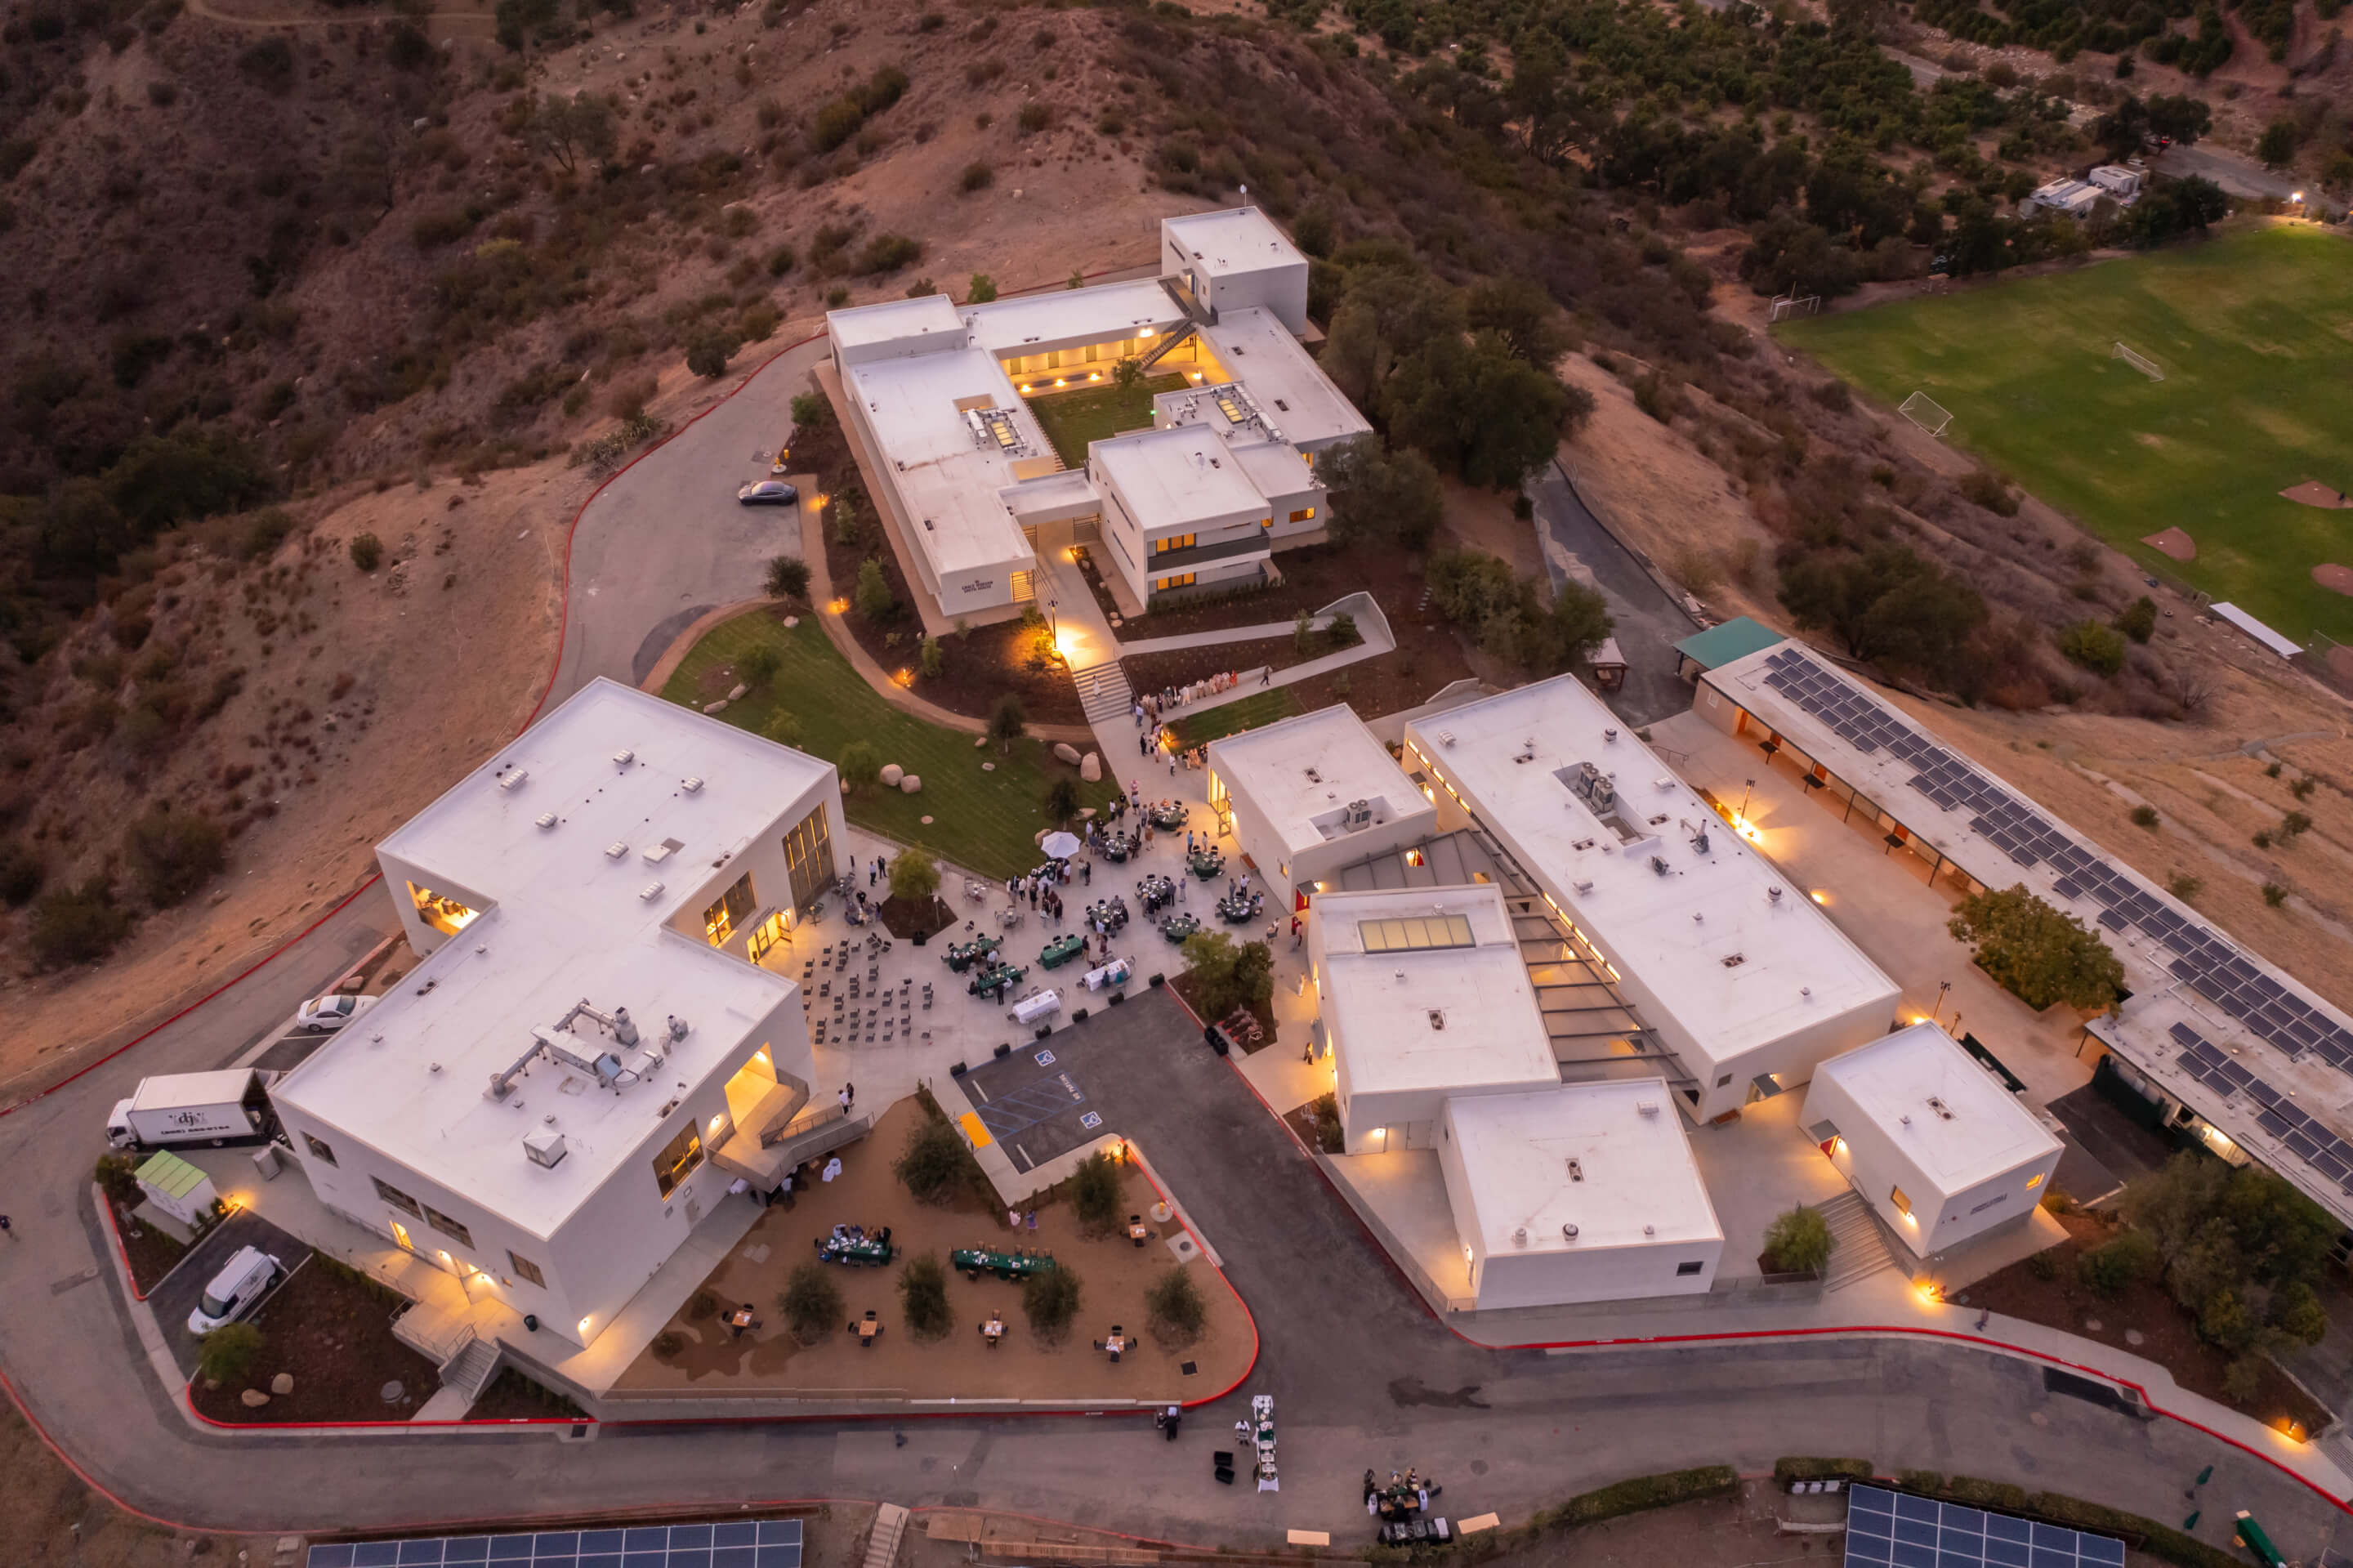 Aerial view of the ojai valley school and its three boxy buildings